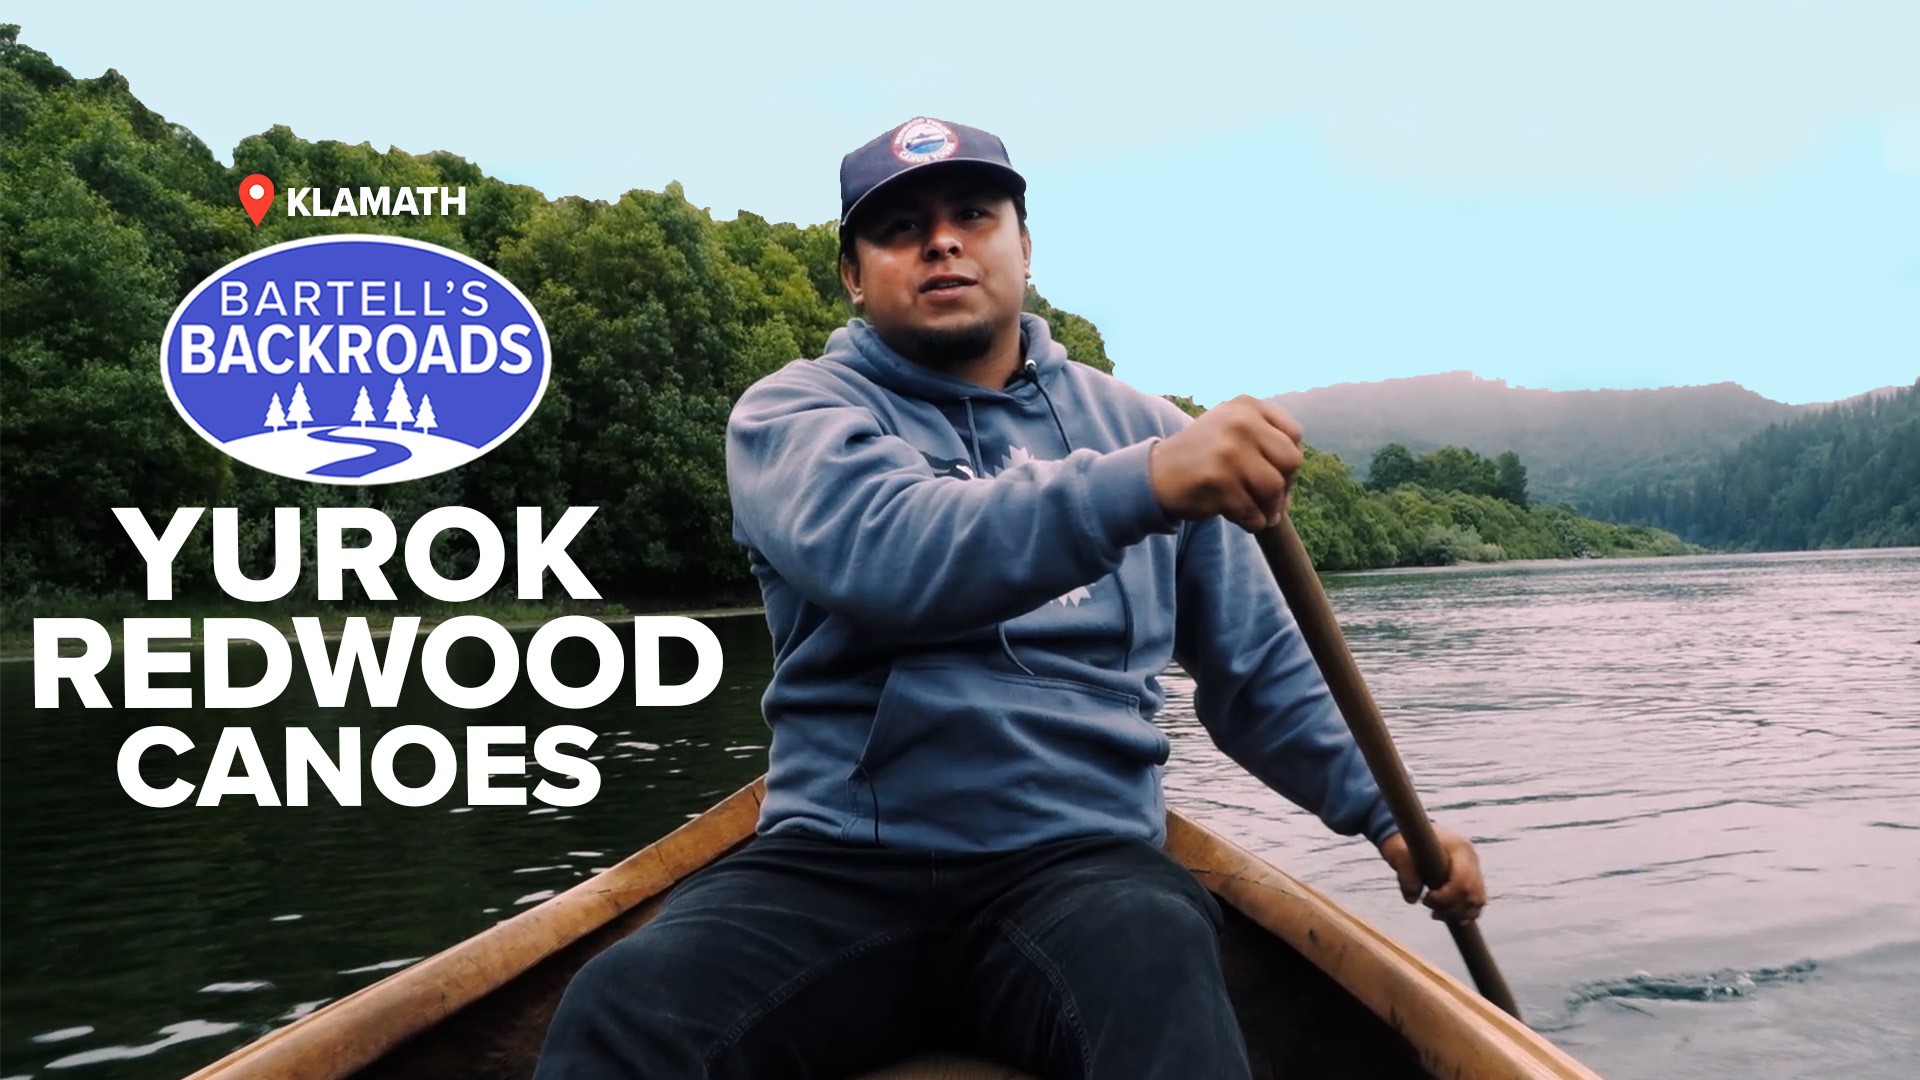 Take a journey down the Klamath River in a Yurok redwood canoe and learn about a once vibrant river, as well as its importance to the culture of the tribe.